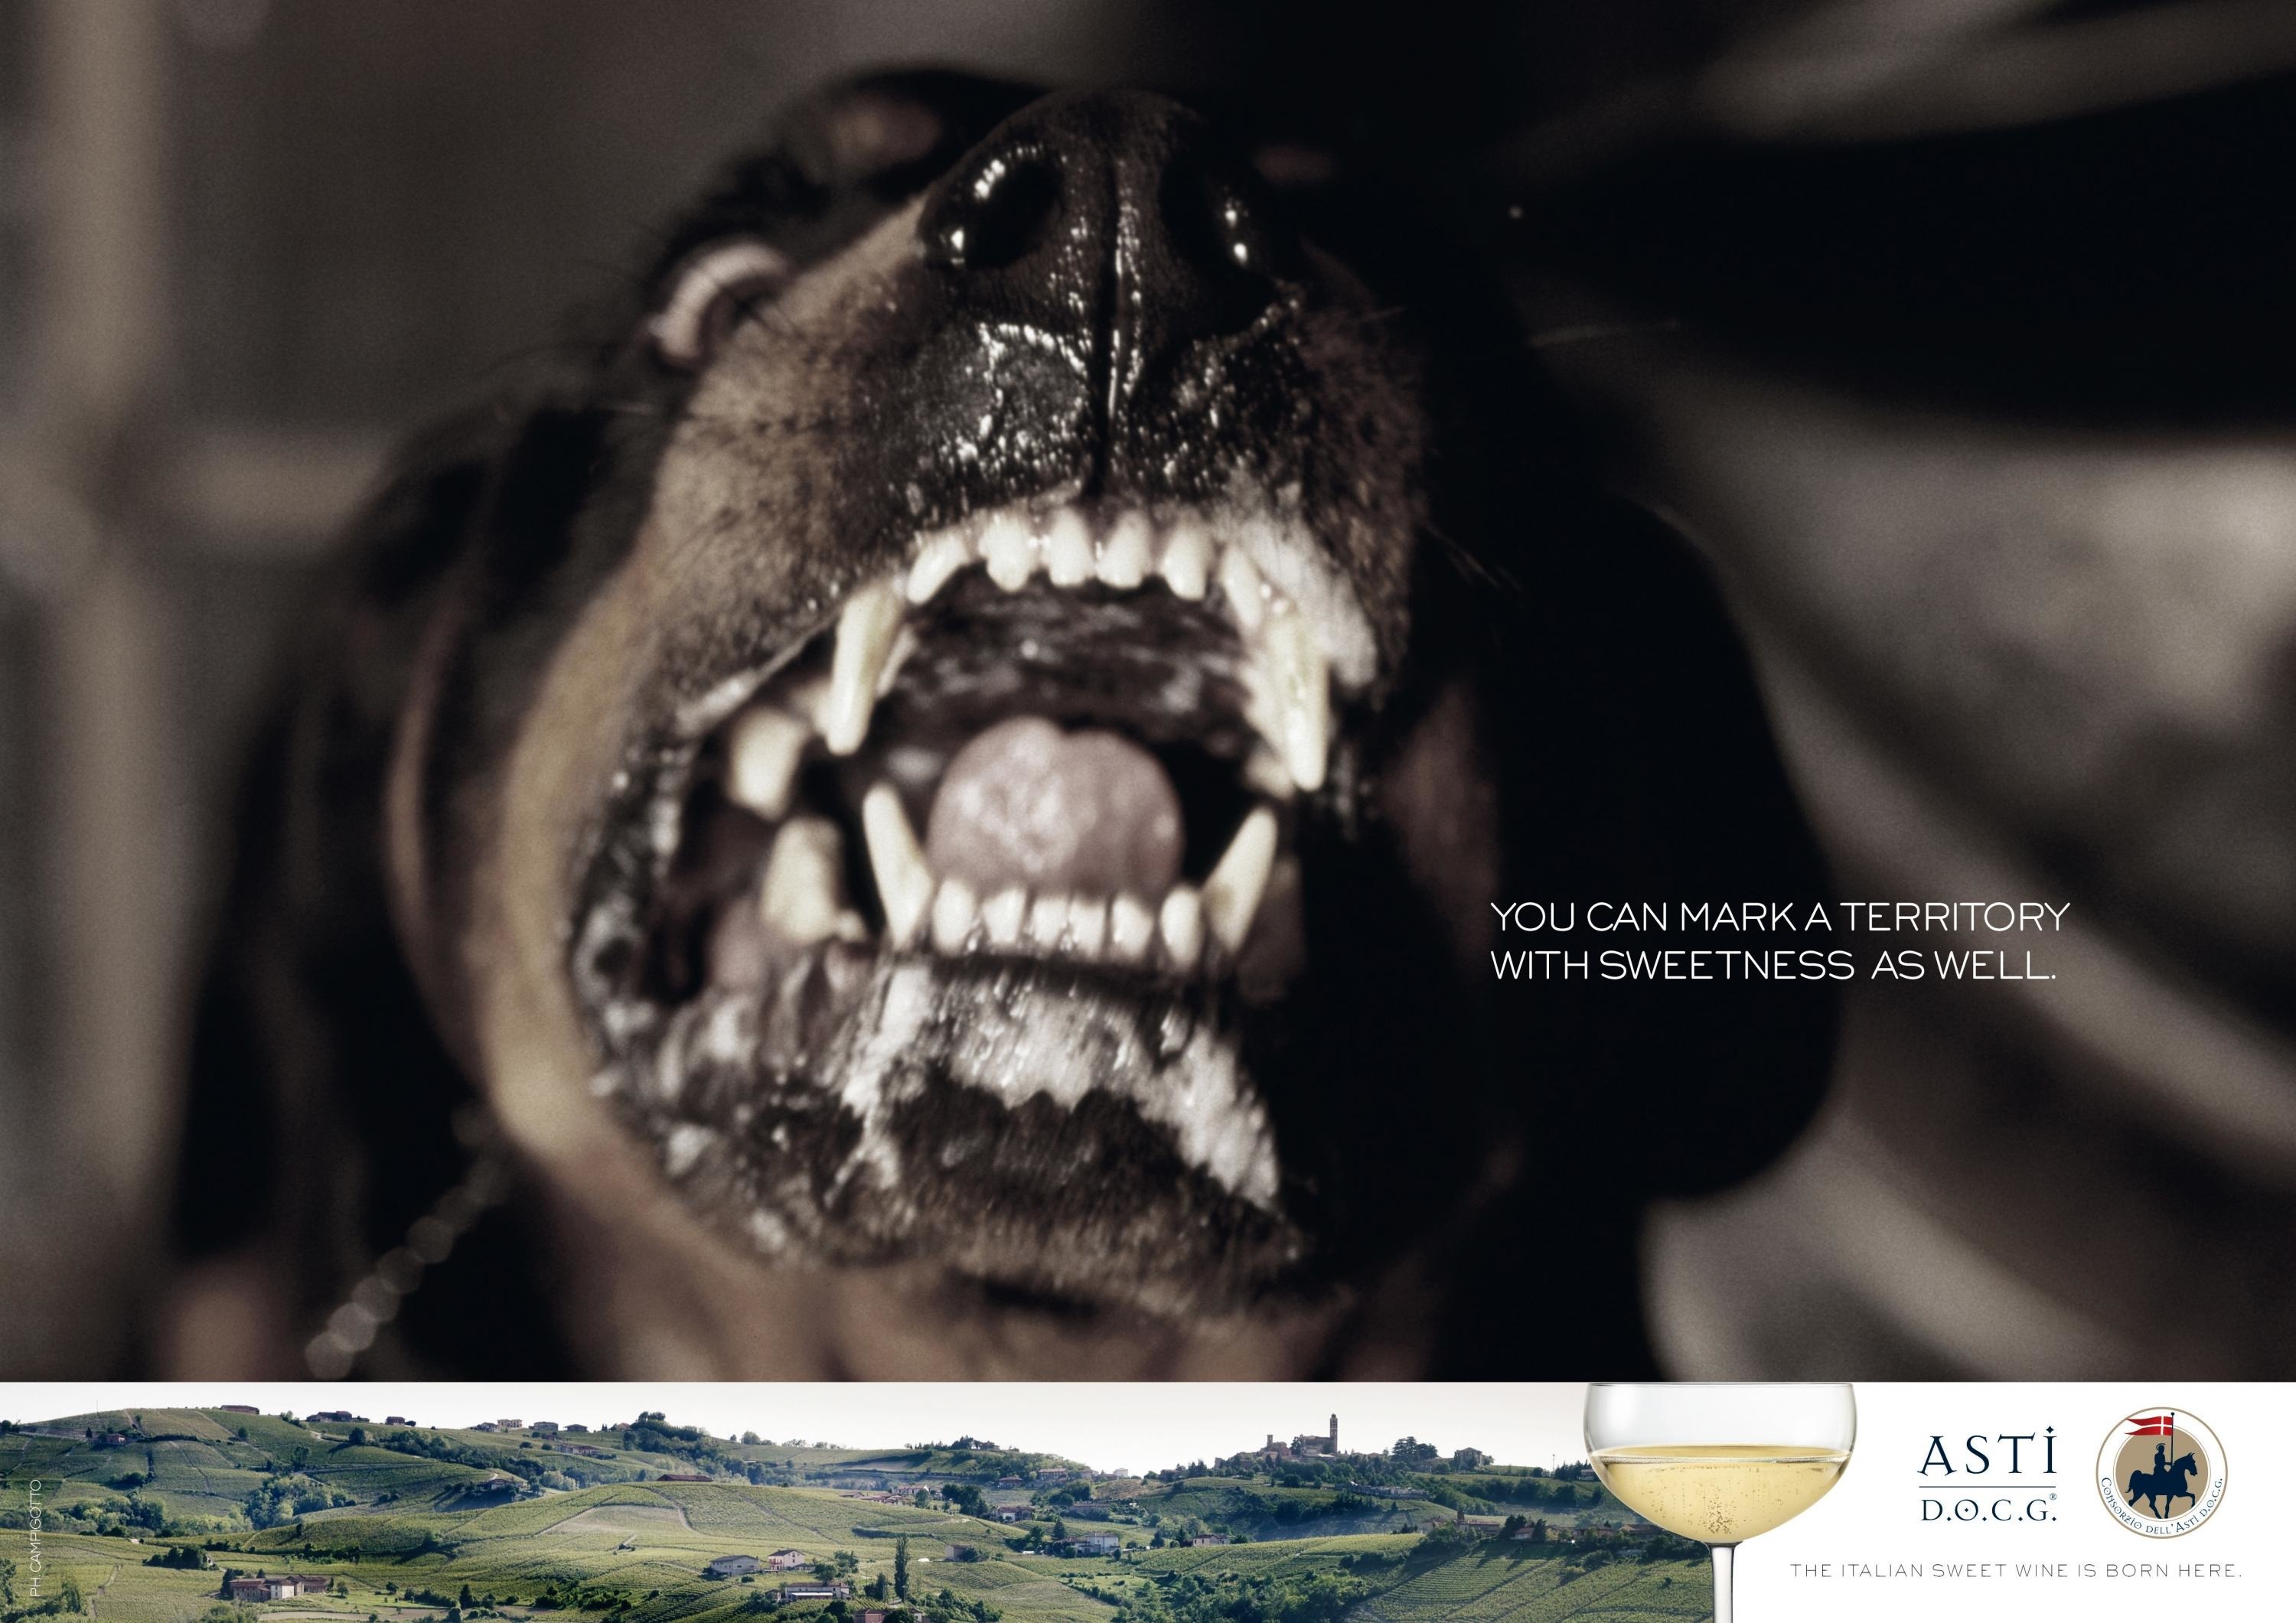 CONSORTIUM FOR THE PROTECTION AND PROMOTION OF ITALIAN SWEET SPARKLING WINE ASTI